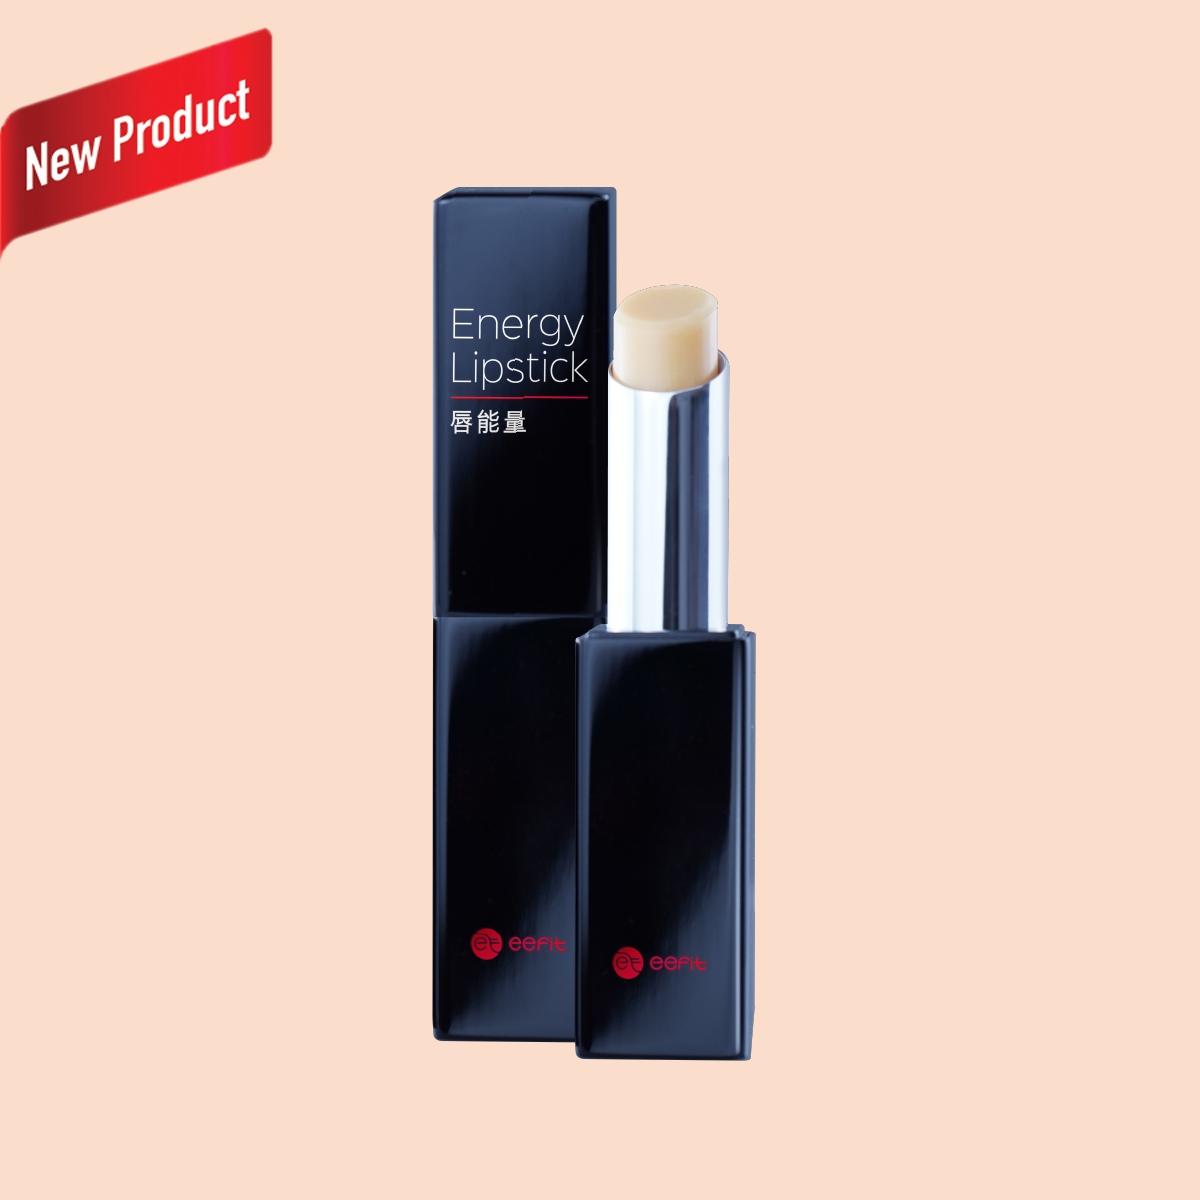 Energy Lipstick Product Frame New Product EN 1